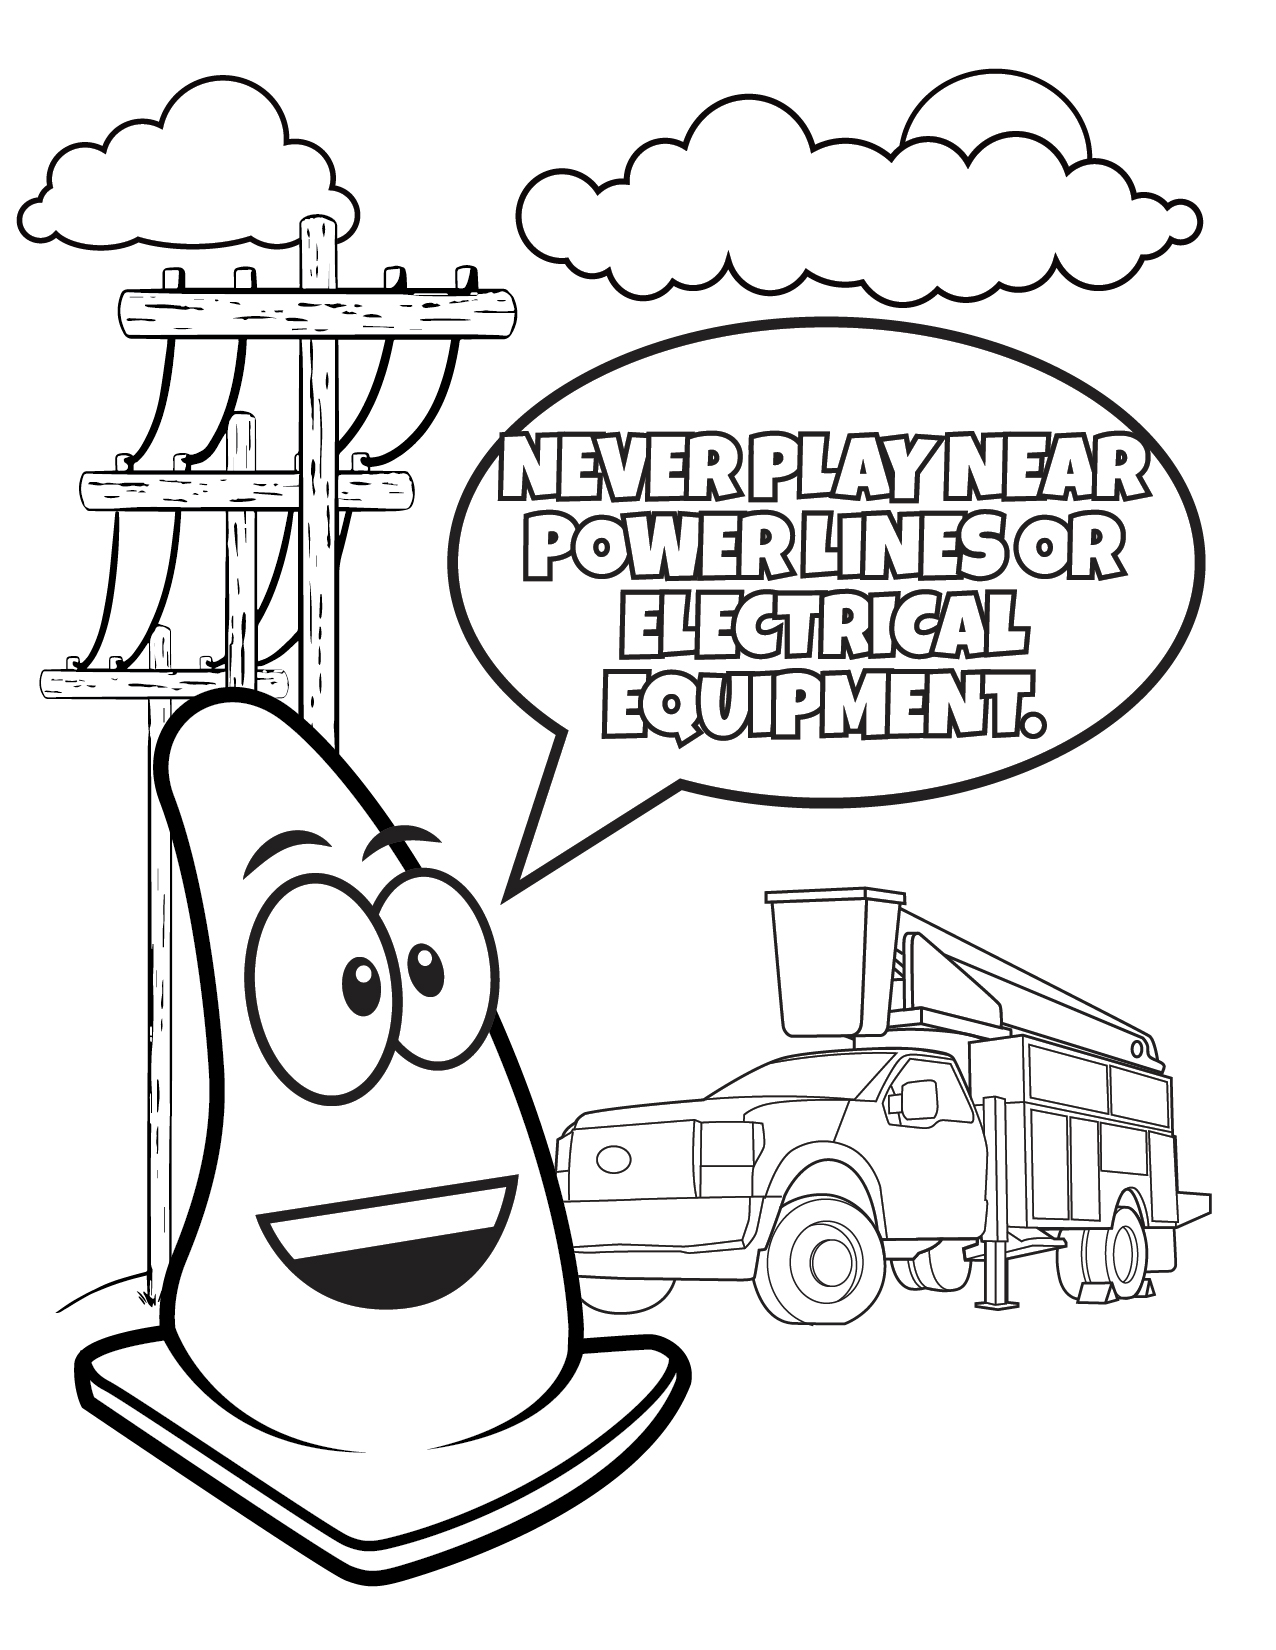 Electricity Coloring Page